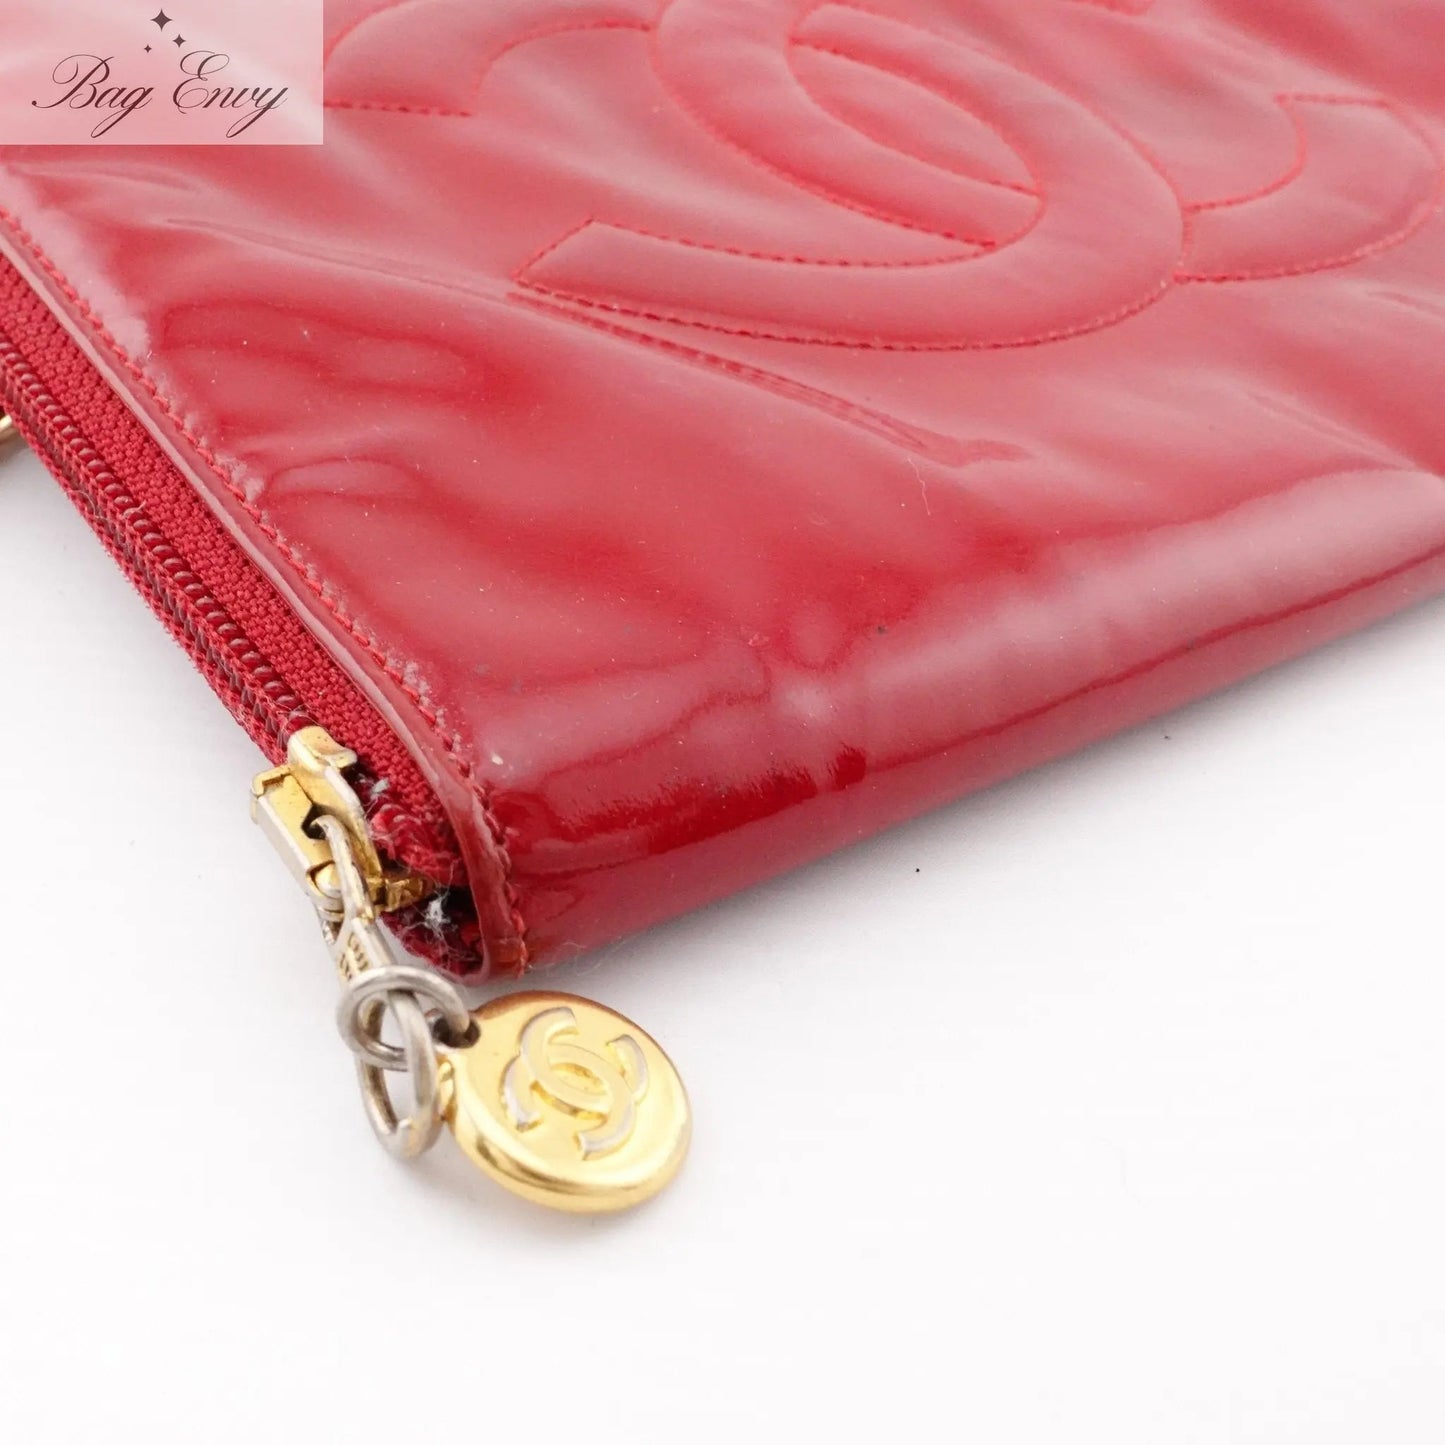 CHANEL Patent Leather Timeless Zip Organizer on Chain - Bag Envy